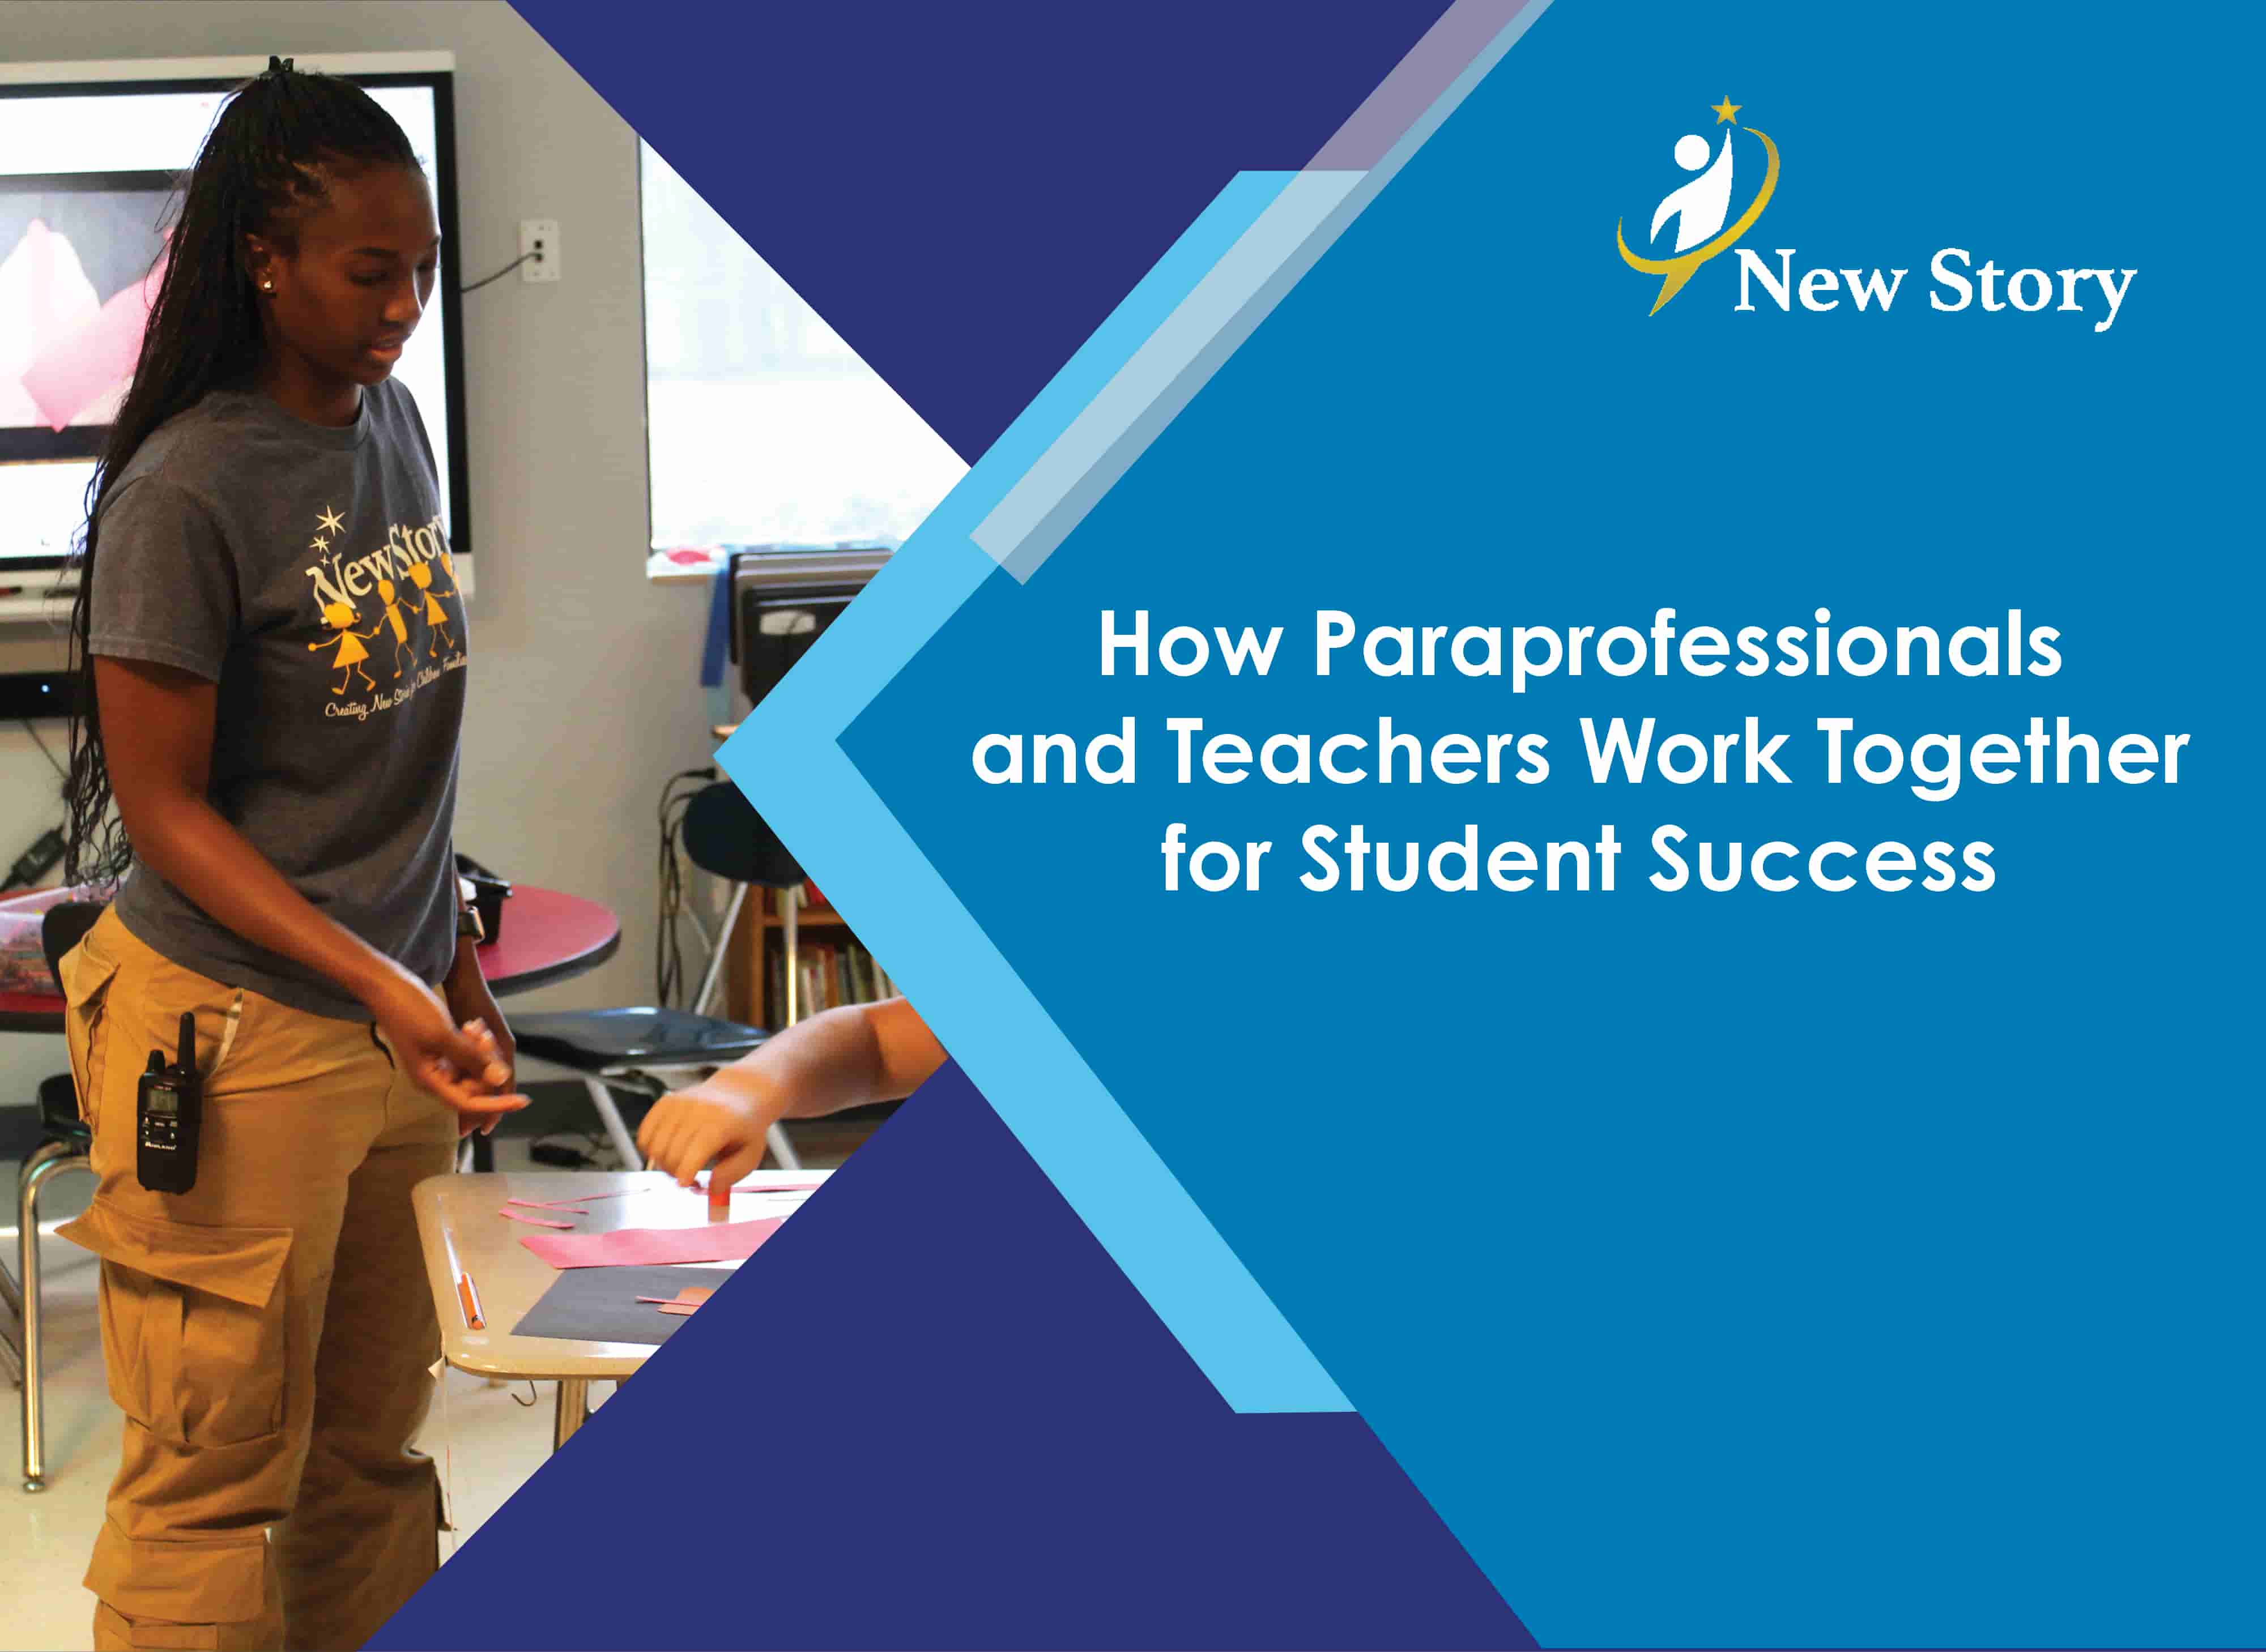 How Paraprofessionals and Teachers Work Together for Student Success